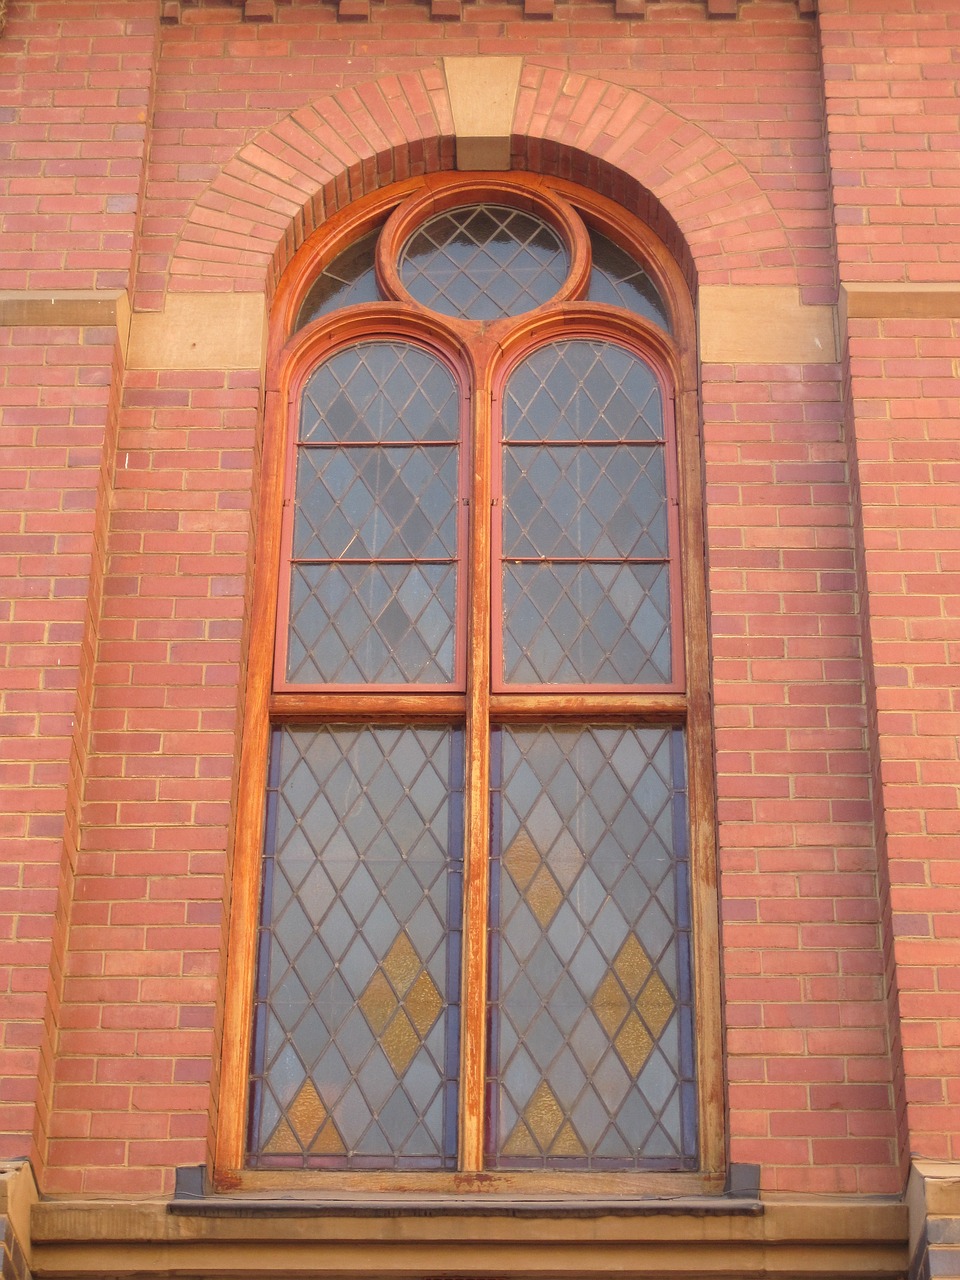 a red brick building with a stained glass window, a photo, inspired by Sydney Prior Hall, natural light window, superior detail, restoration, part of the screen